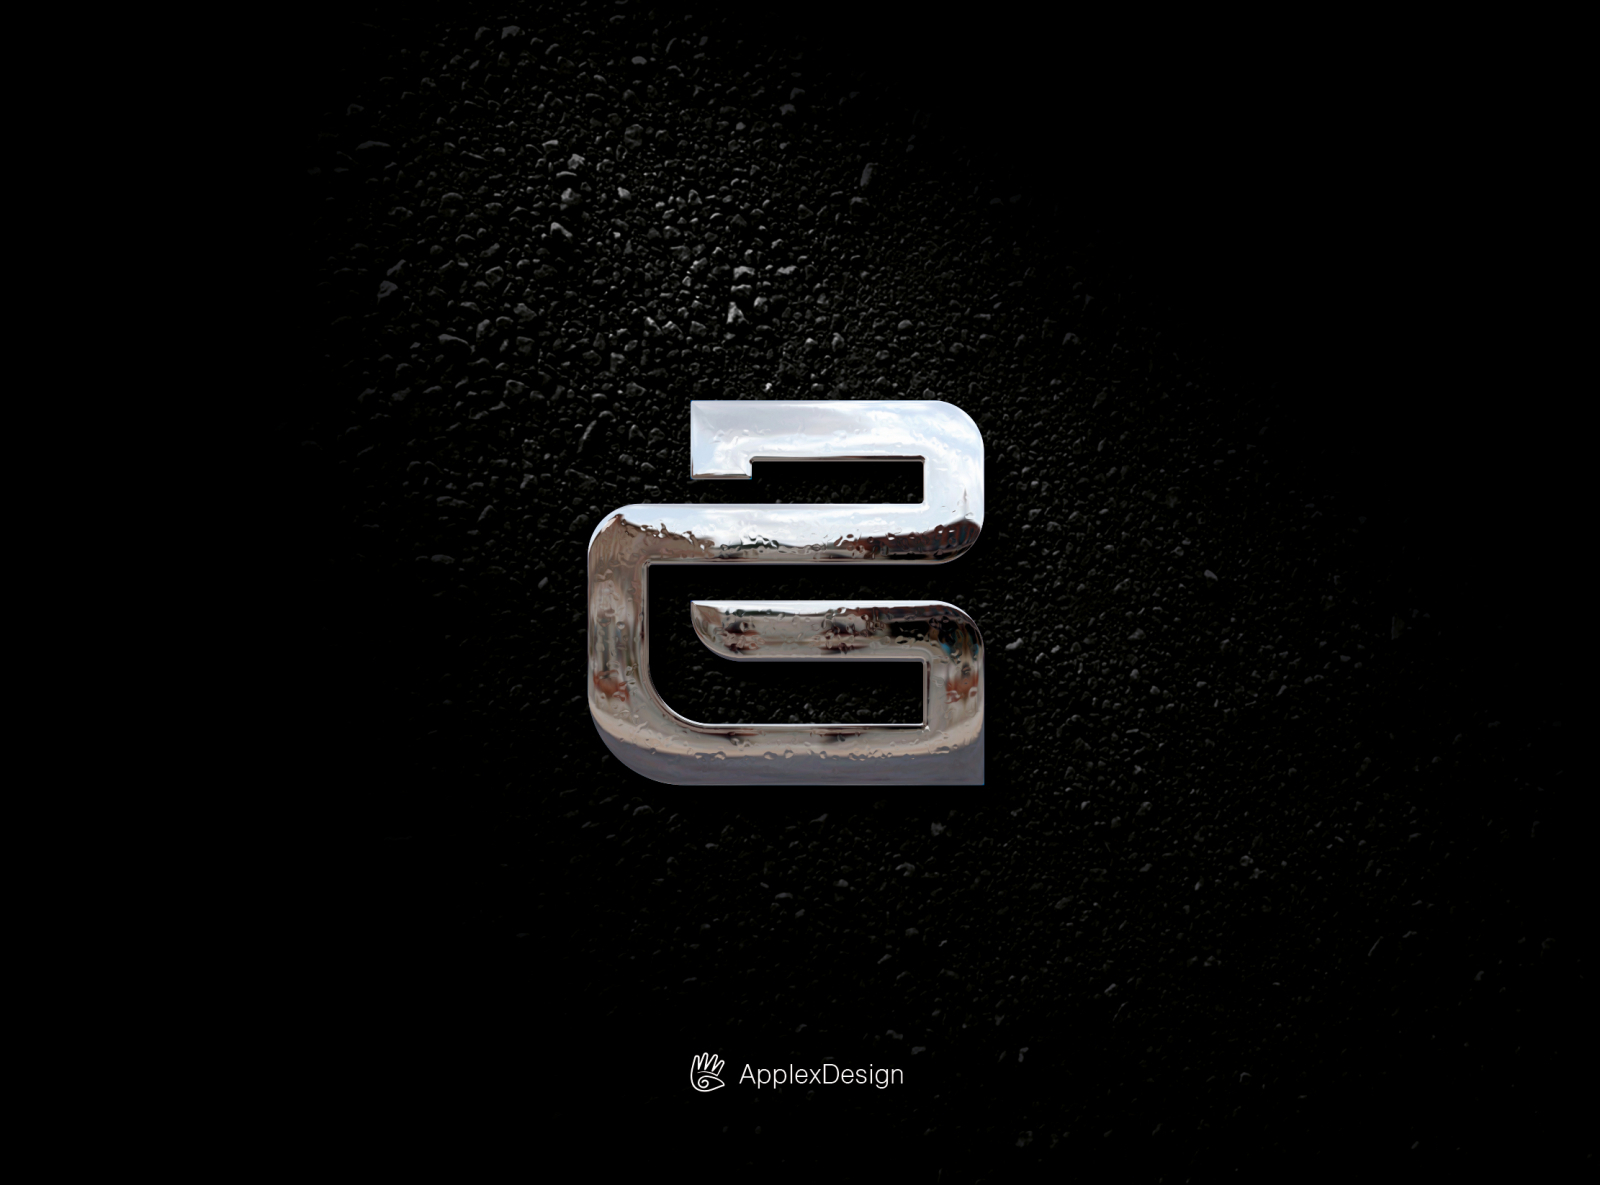 2G Infinity by ApplexDesign on Dribbble